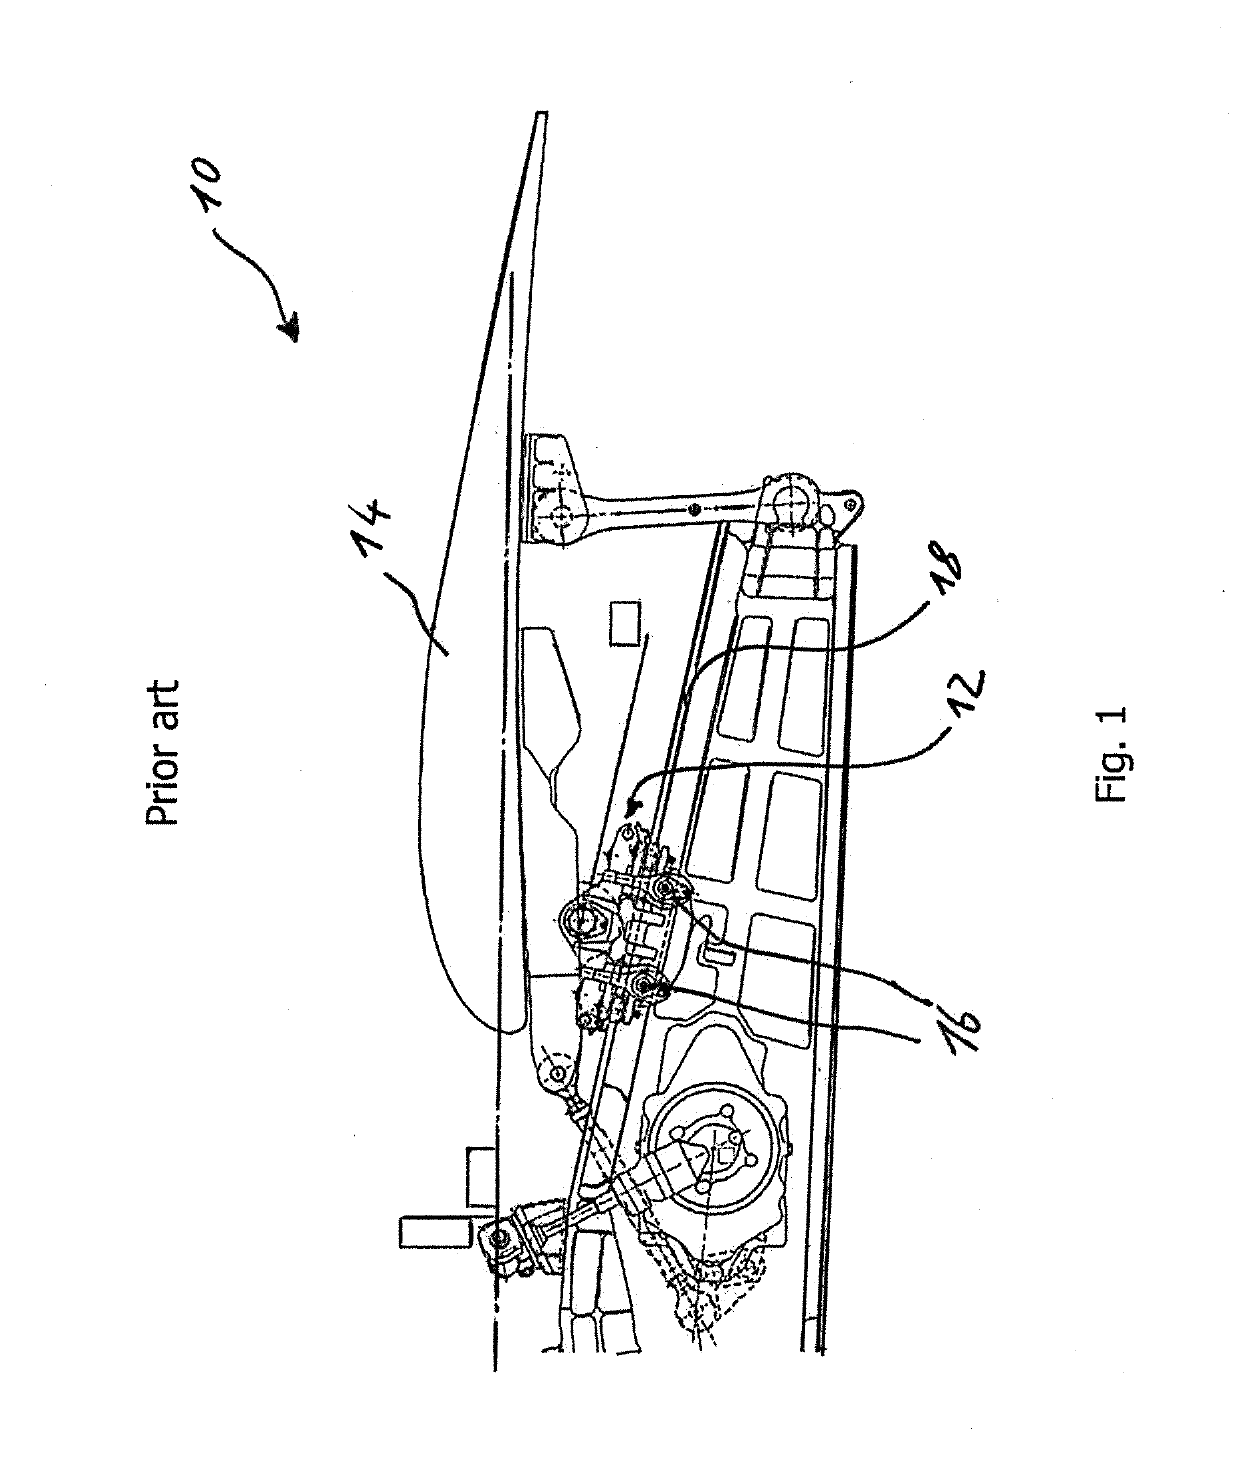 Carriage for supporting and guiding a flap and airfoil flap system for use in an aircraft